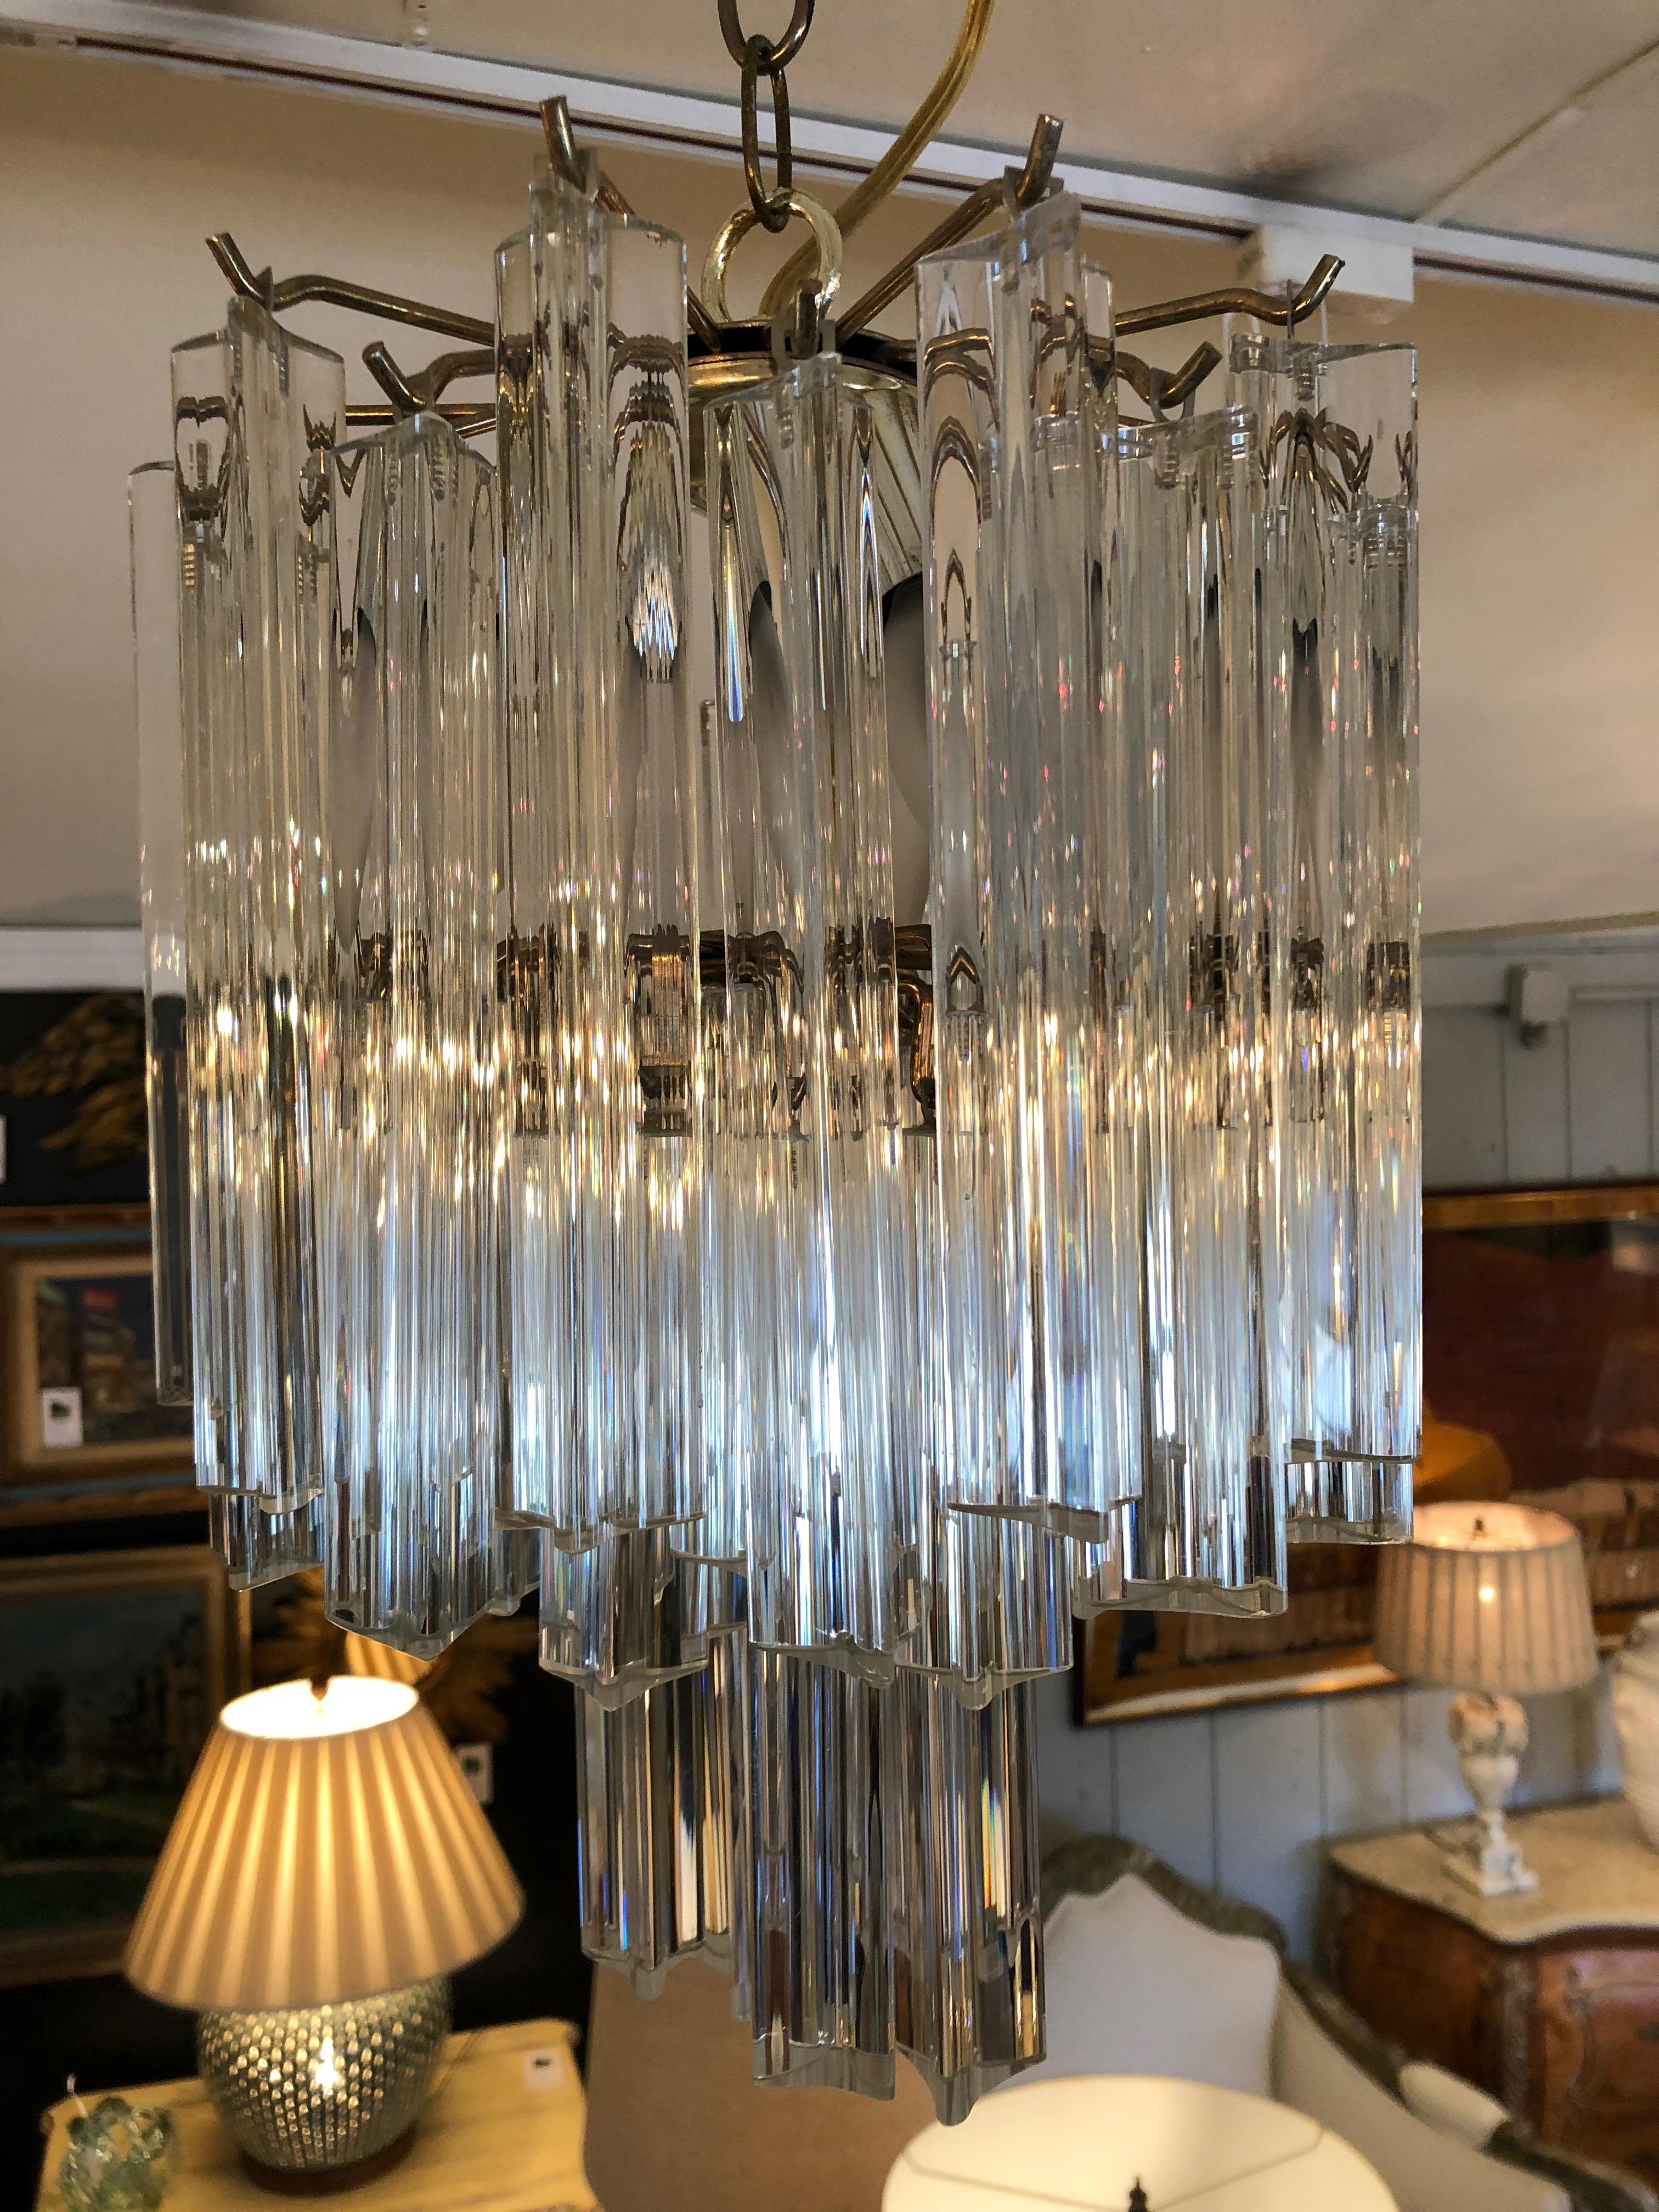 Very glamorous medium sized Venini chandelier having 30 plus glistening rods of glass that hang in varying levels. Super dramatic for a powder room, small foyer or bedroom.
3 candle bulbs, 40 watt each.